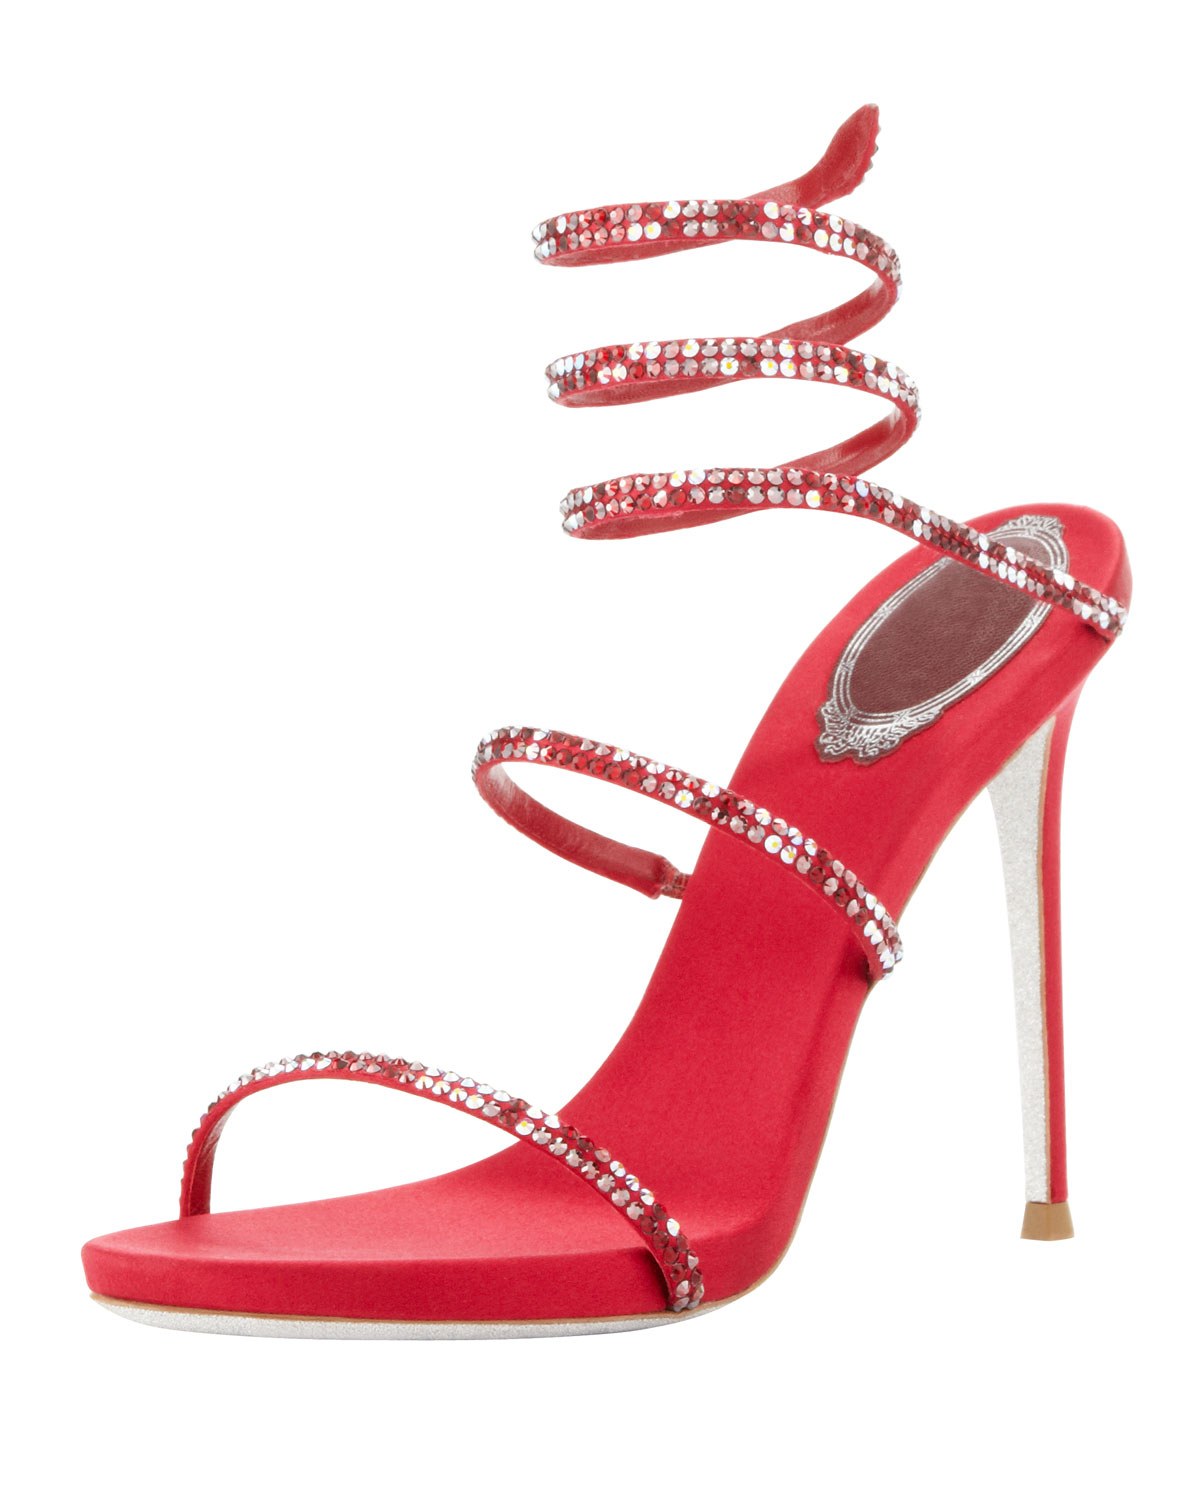 Lyst - Rene Caovilla Crystal Spiral Anklewrap Sandal Red in Red